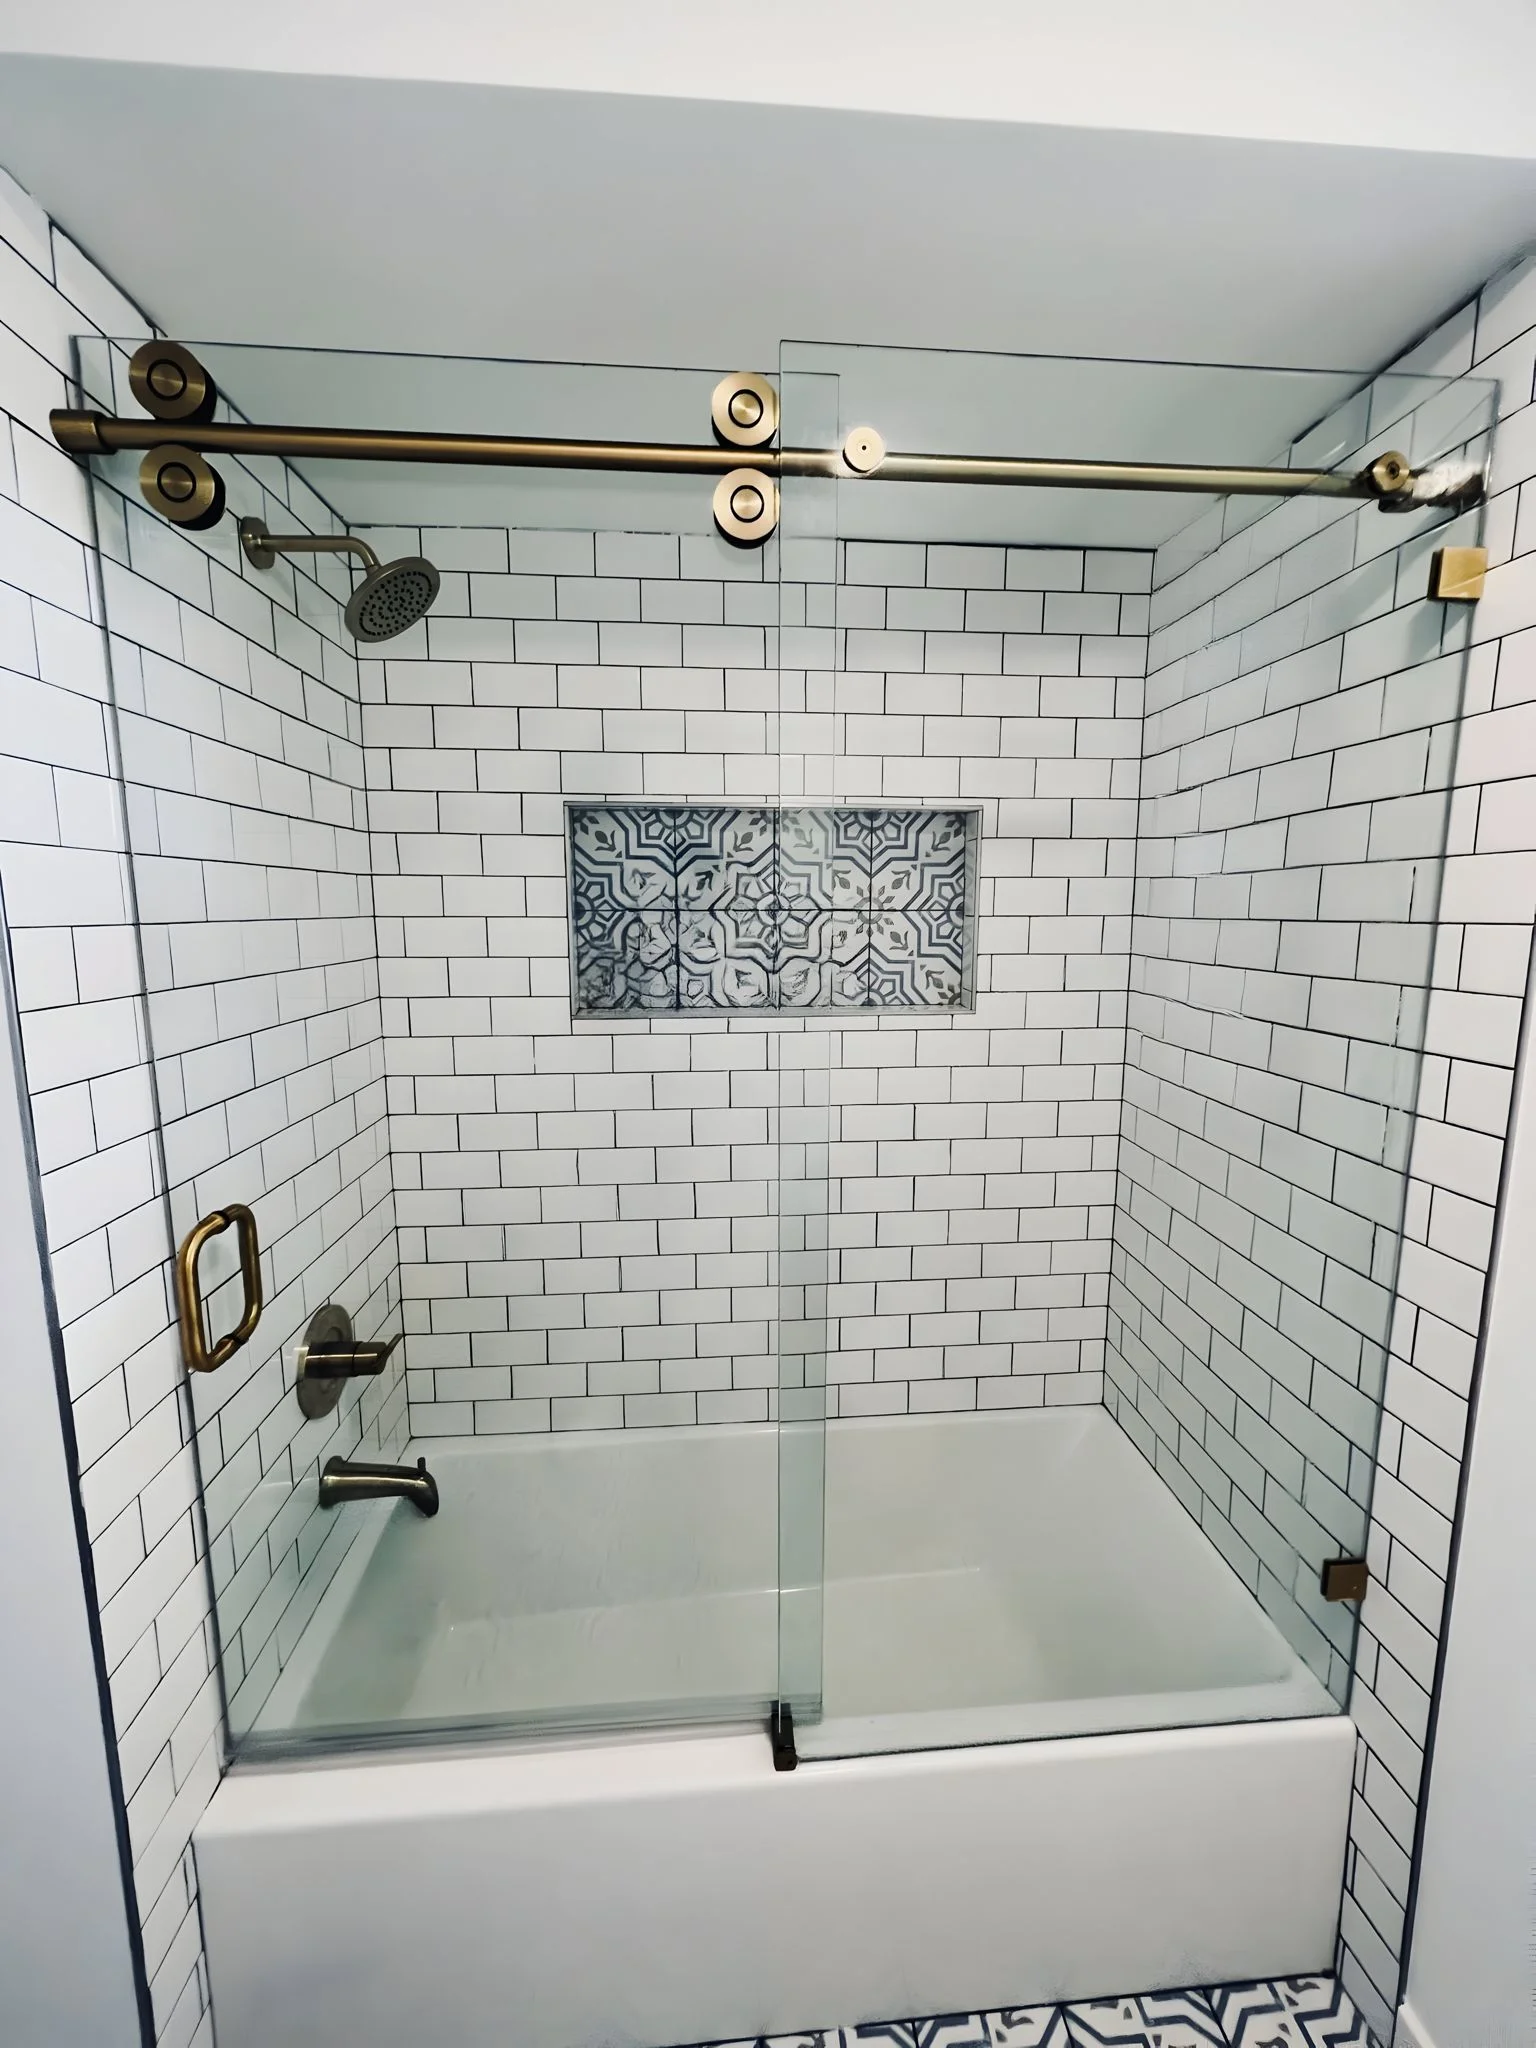 How to Remove Sliding Shower Doors | Best Step by Step Guide